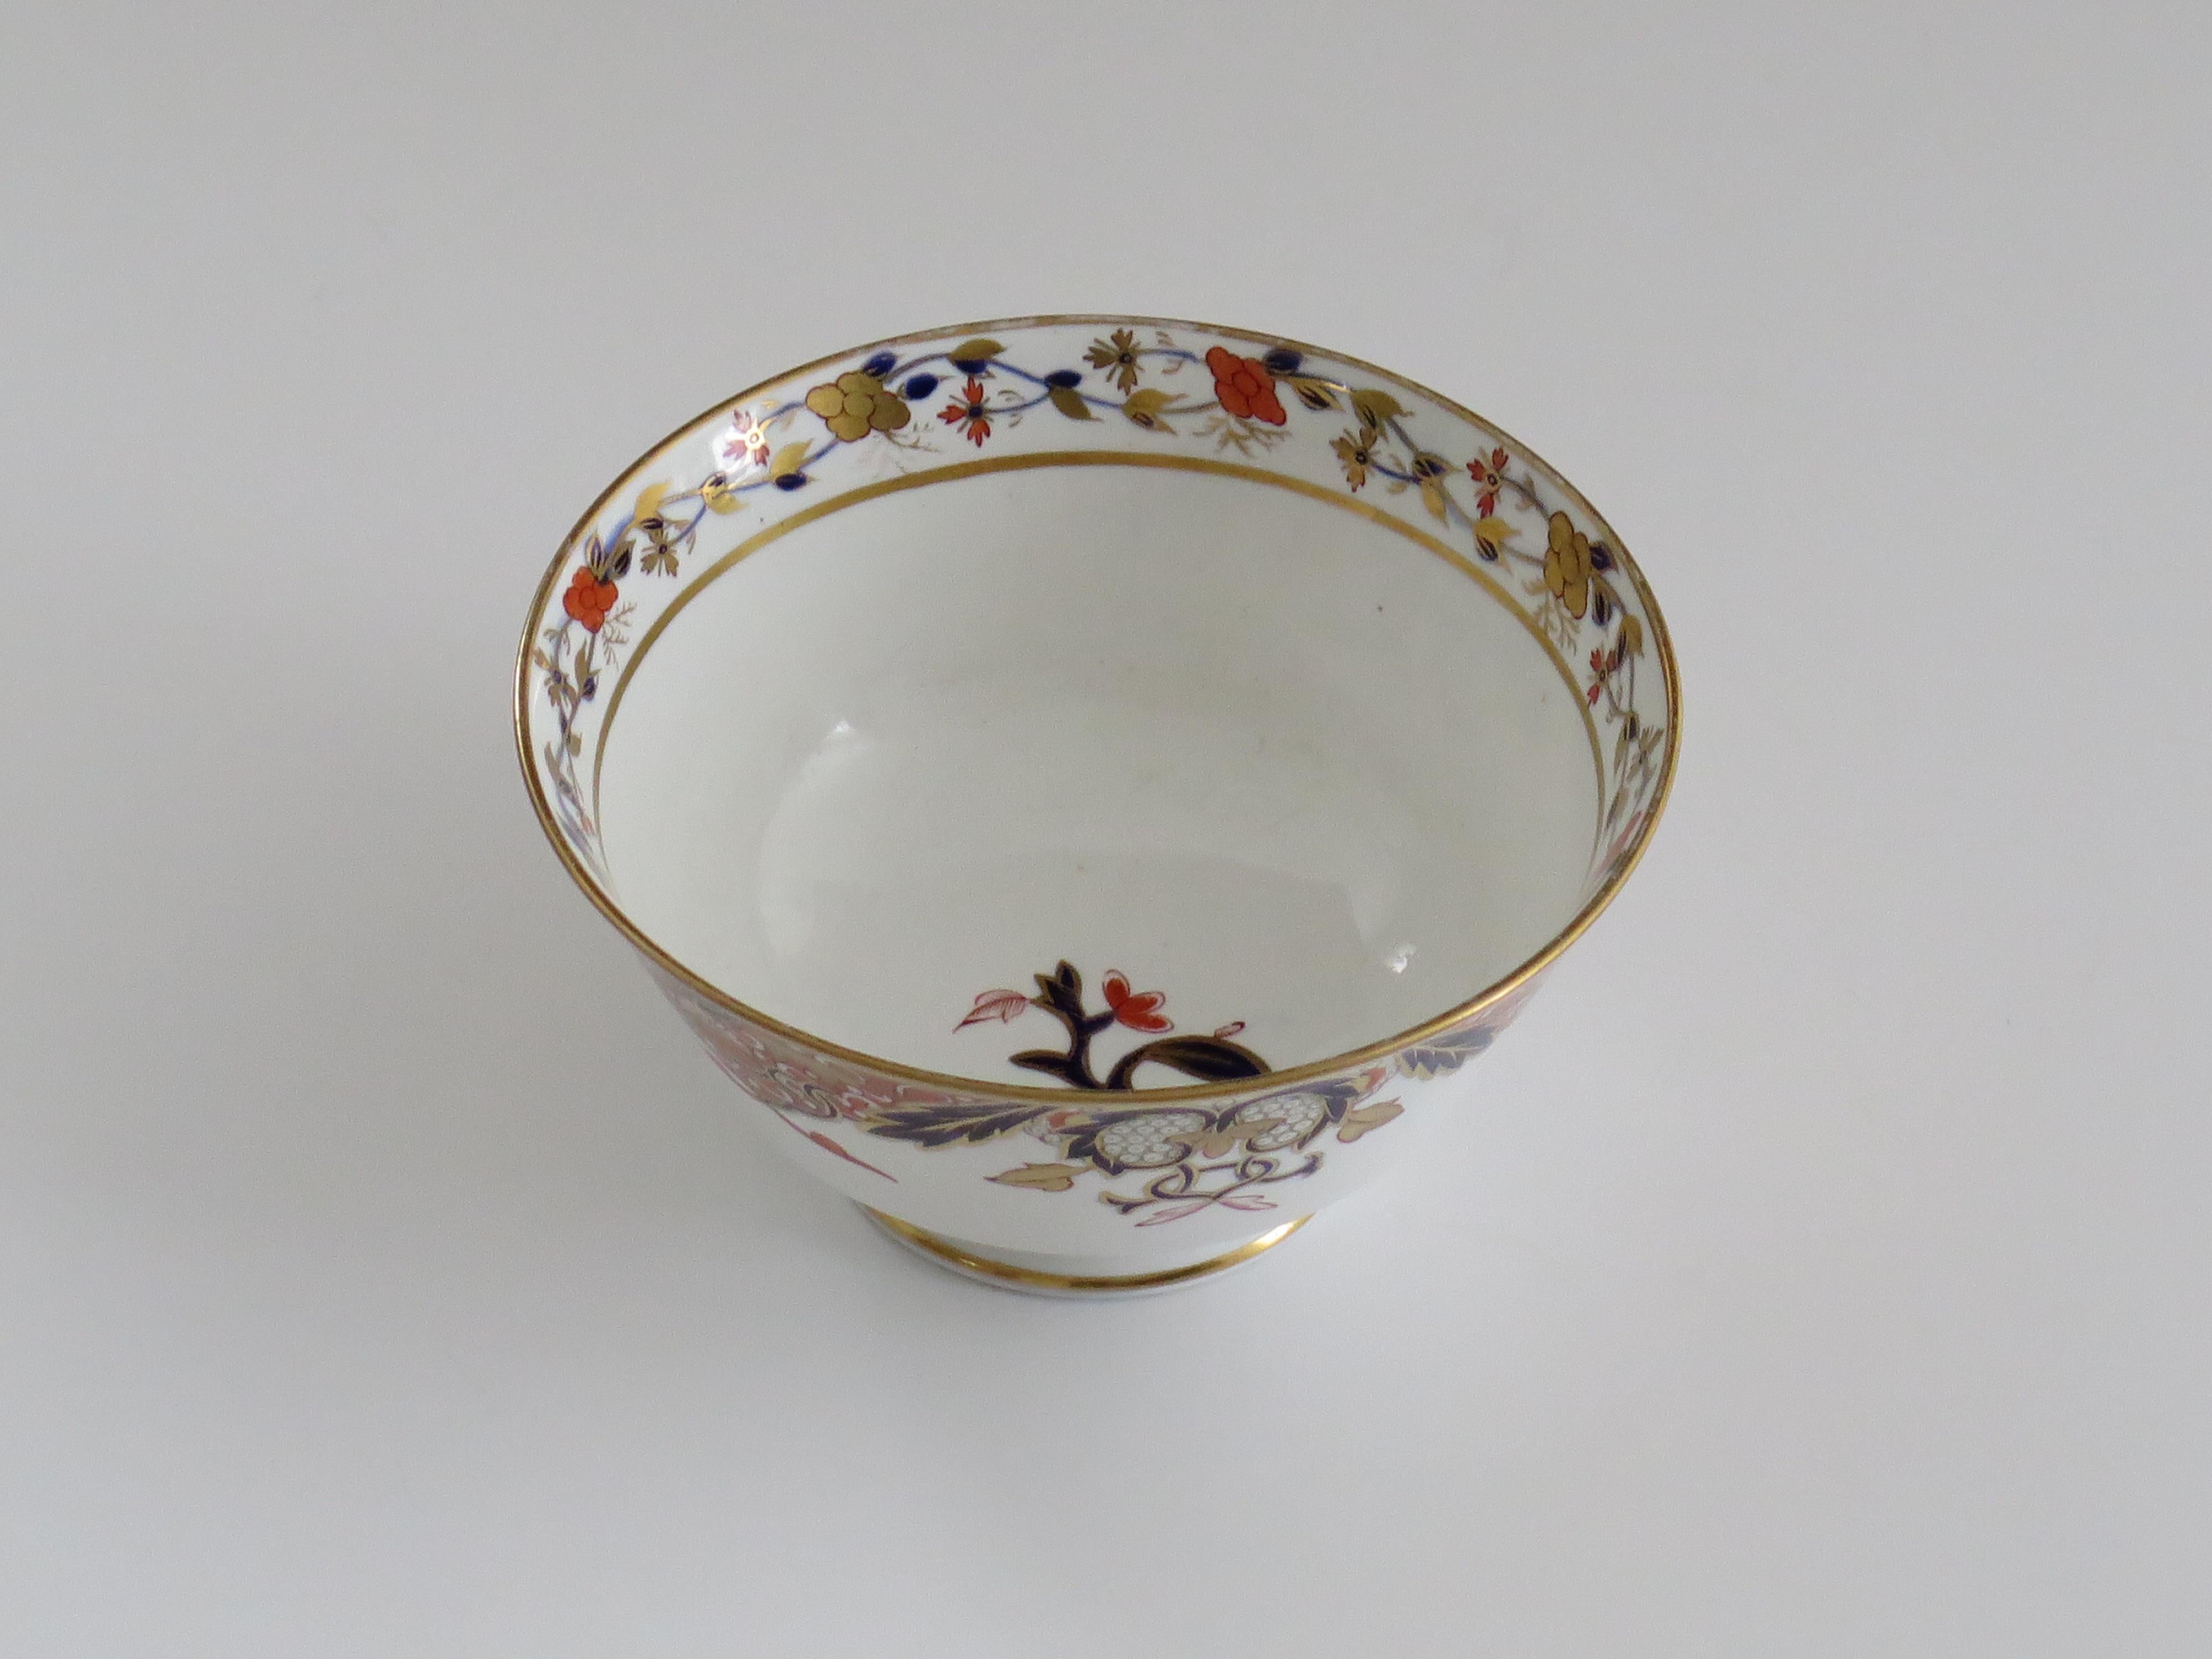 Hand-Painted Early 19th Century Spode Porcelain Slop Bowl in Japan Ptn 1946, circa 1810 For Sale